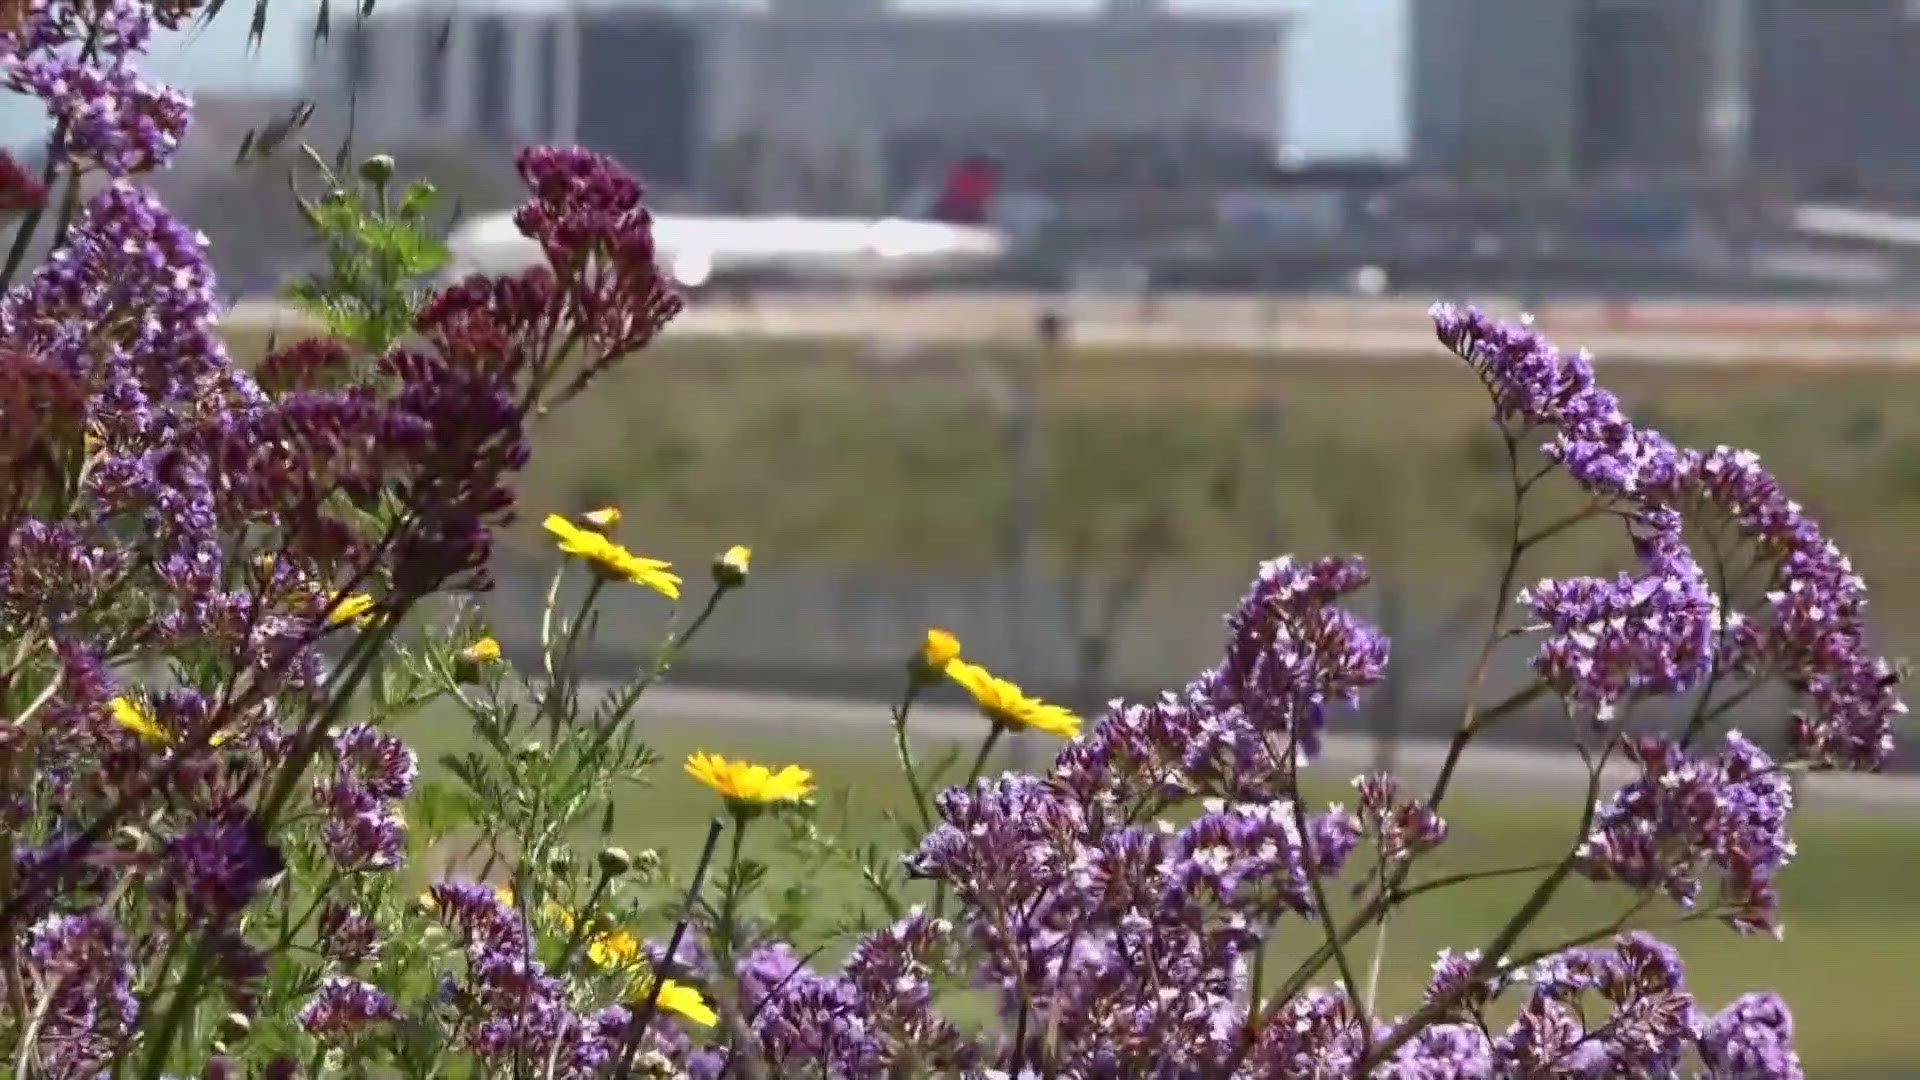 The flowers can be seen outside LAX.